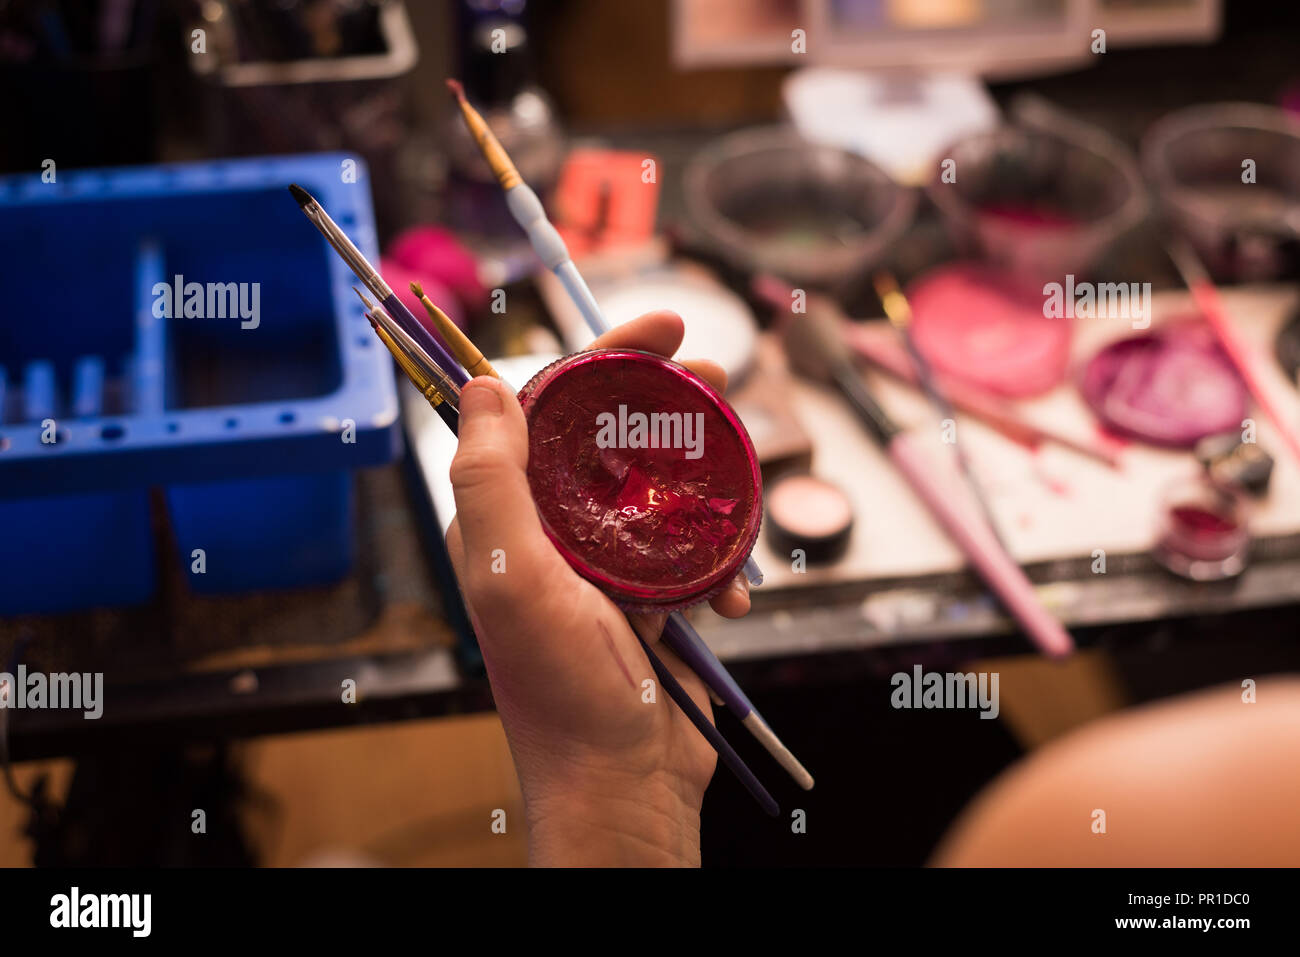 Woman holding red paint container and brushes Stock Photo